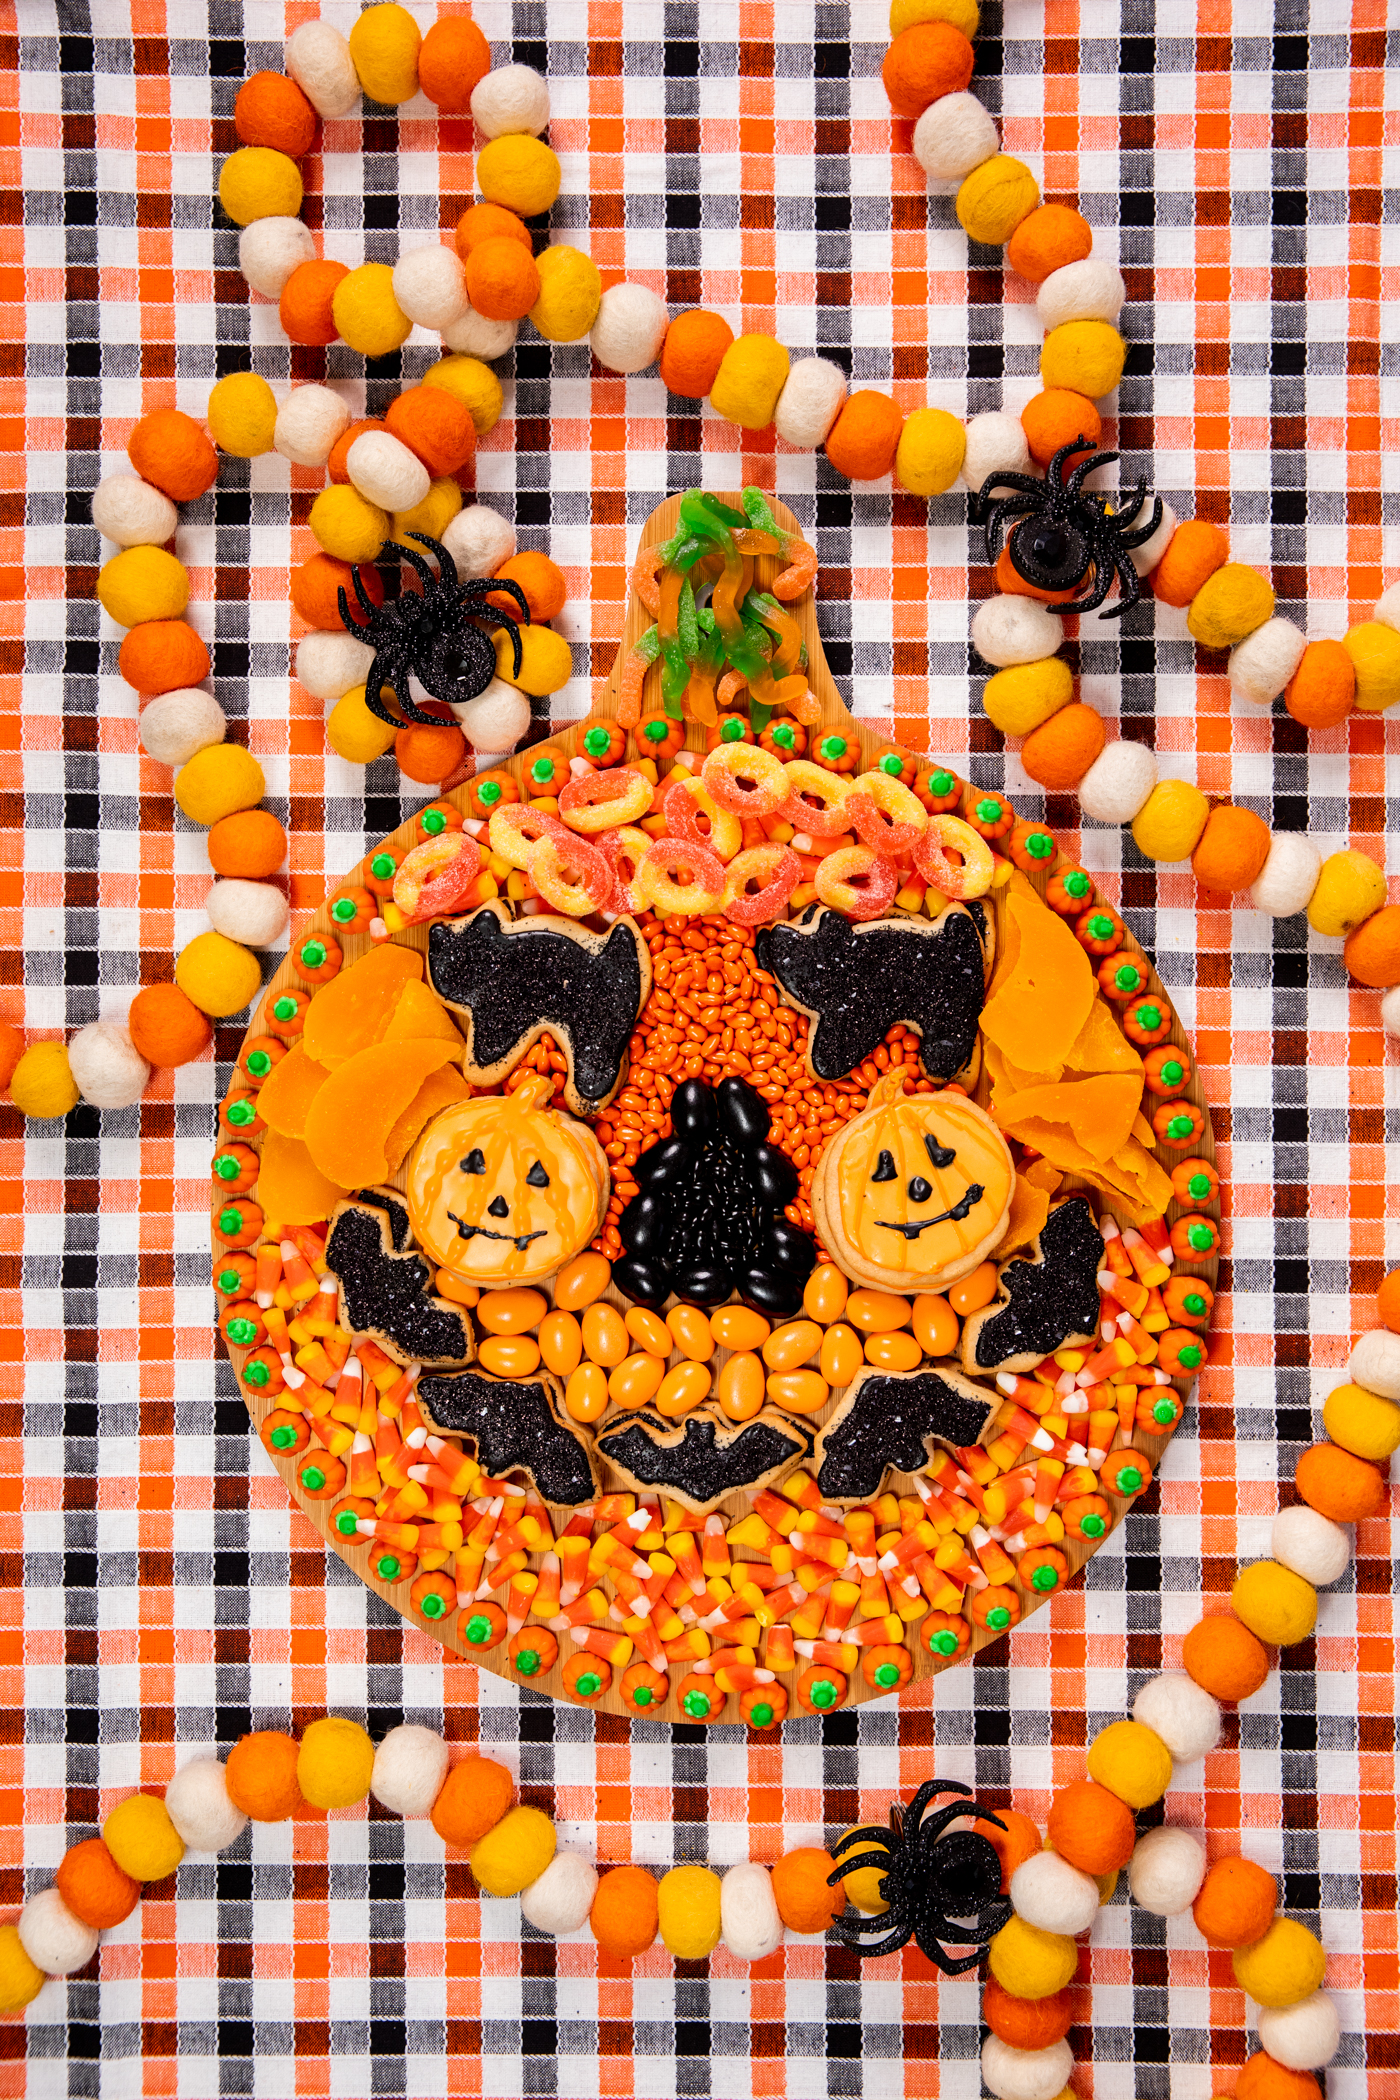 wooden snack board with assorted orange and black snacks assembled to resemble a pumpkin